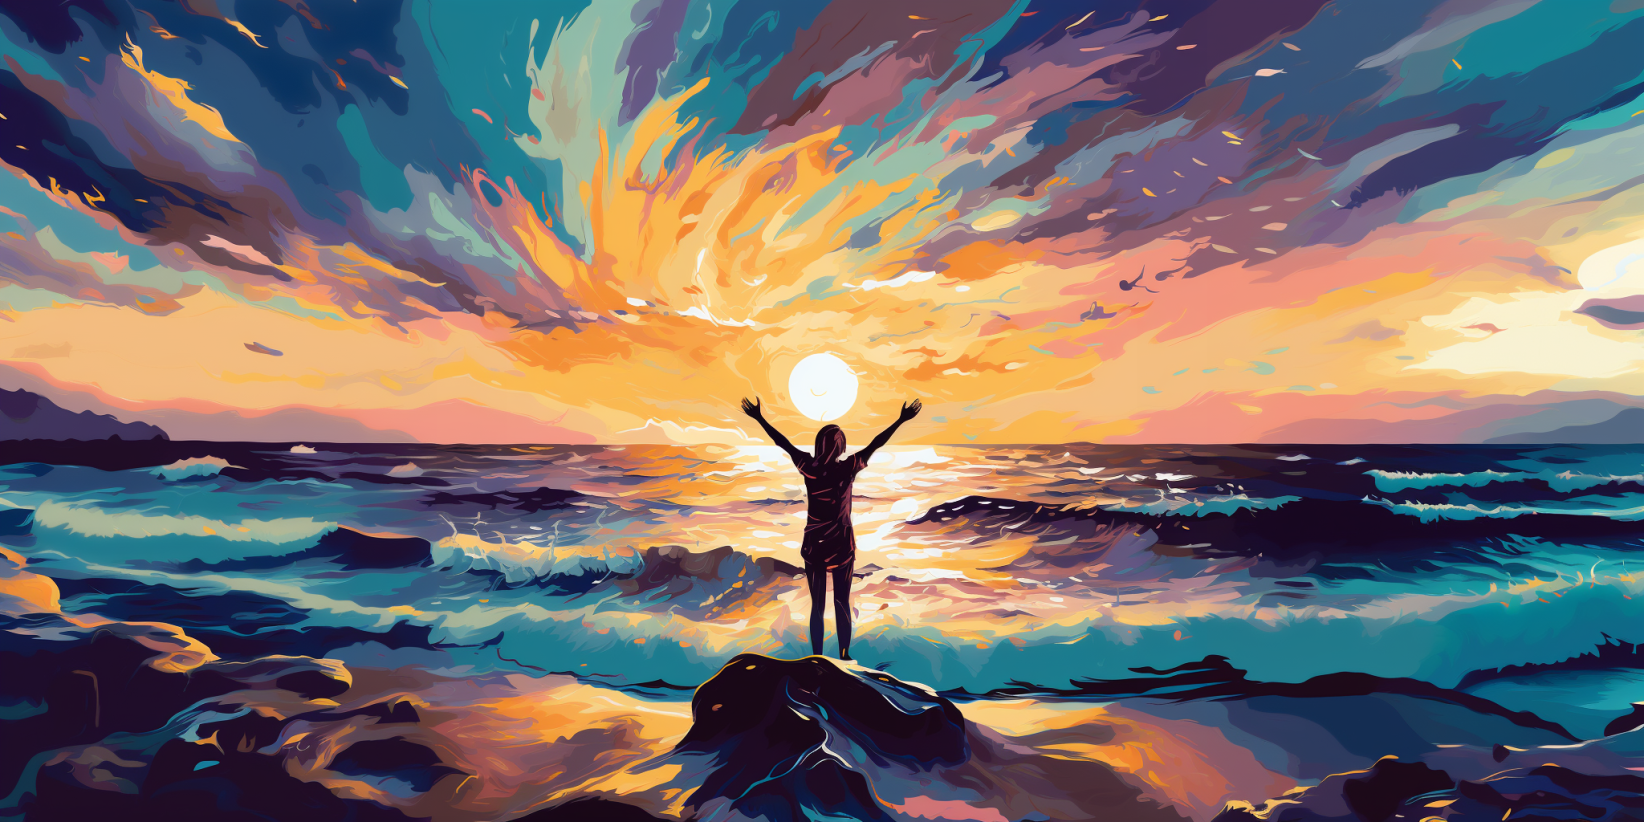 a person silhouette standing with his hands up on the seashore, the sea is calm and beautiful, sun is rising, tender pastel colours, blue, violet, terracotta, turquoise, yellow